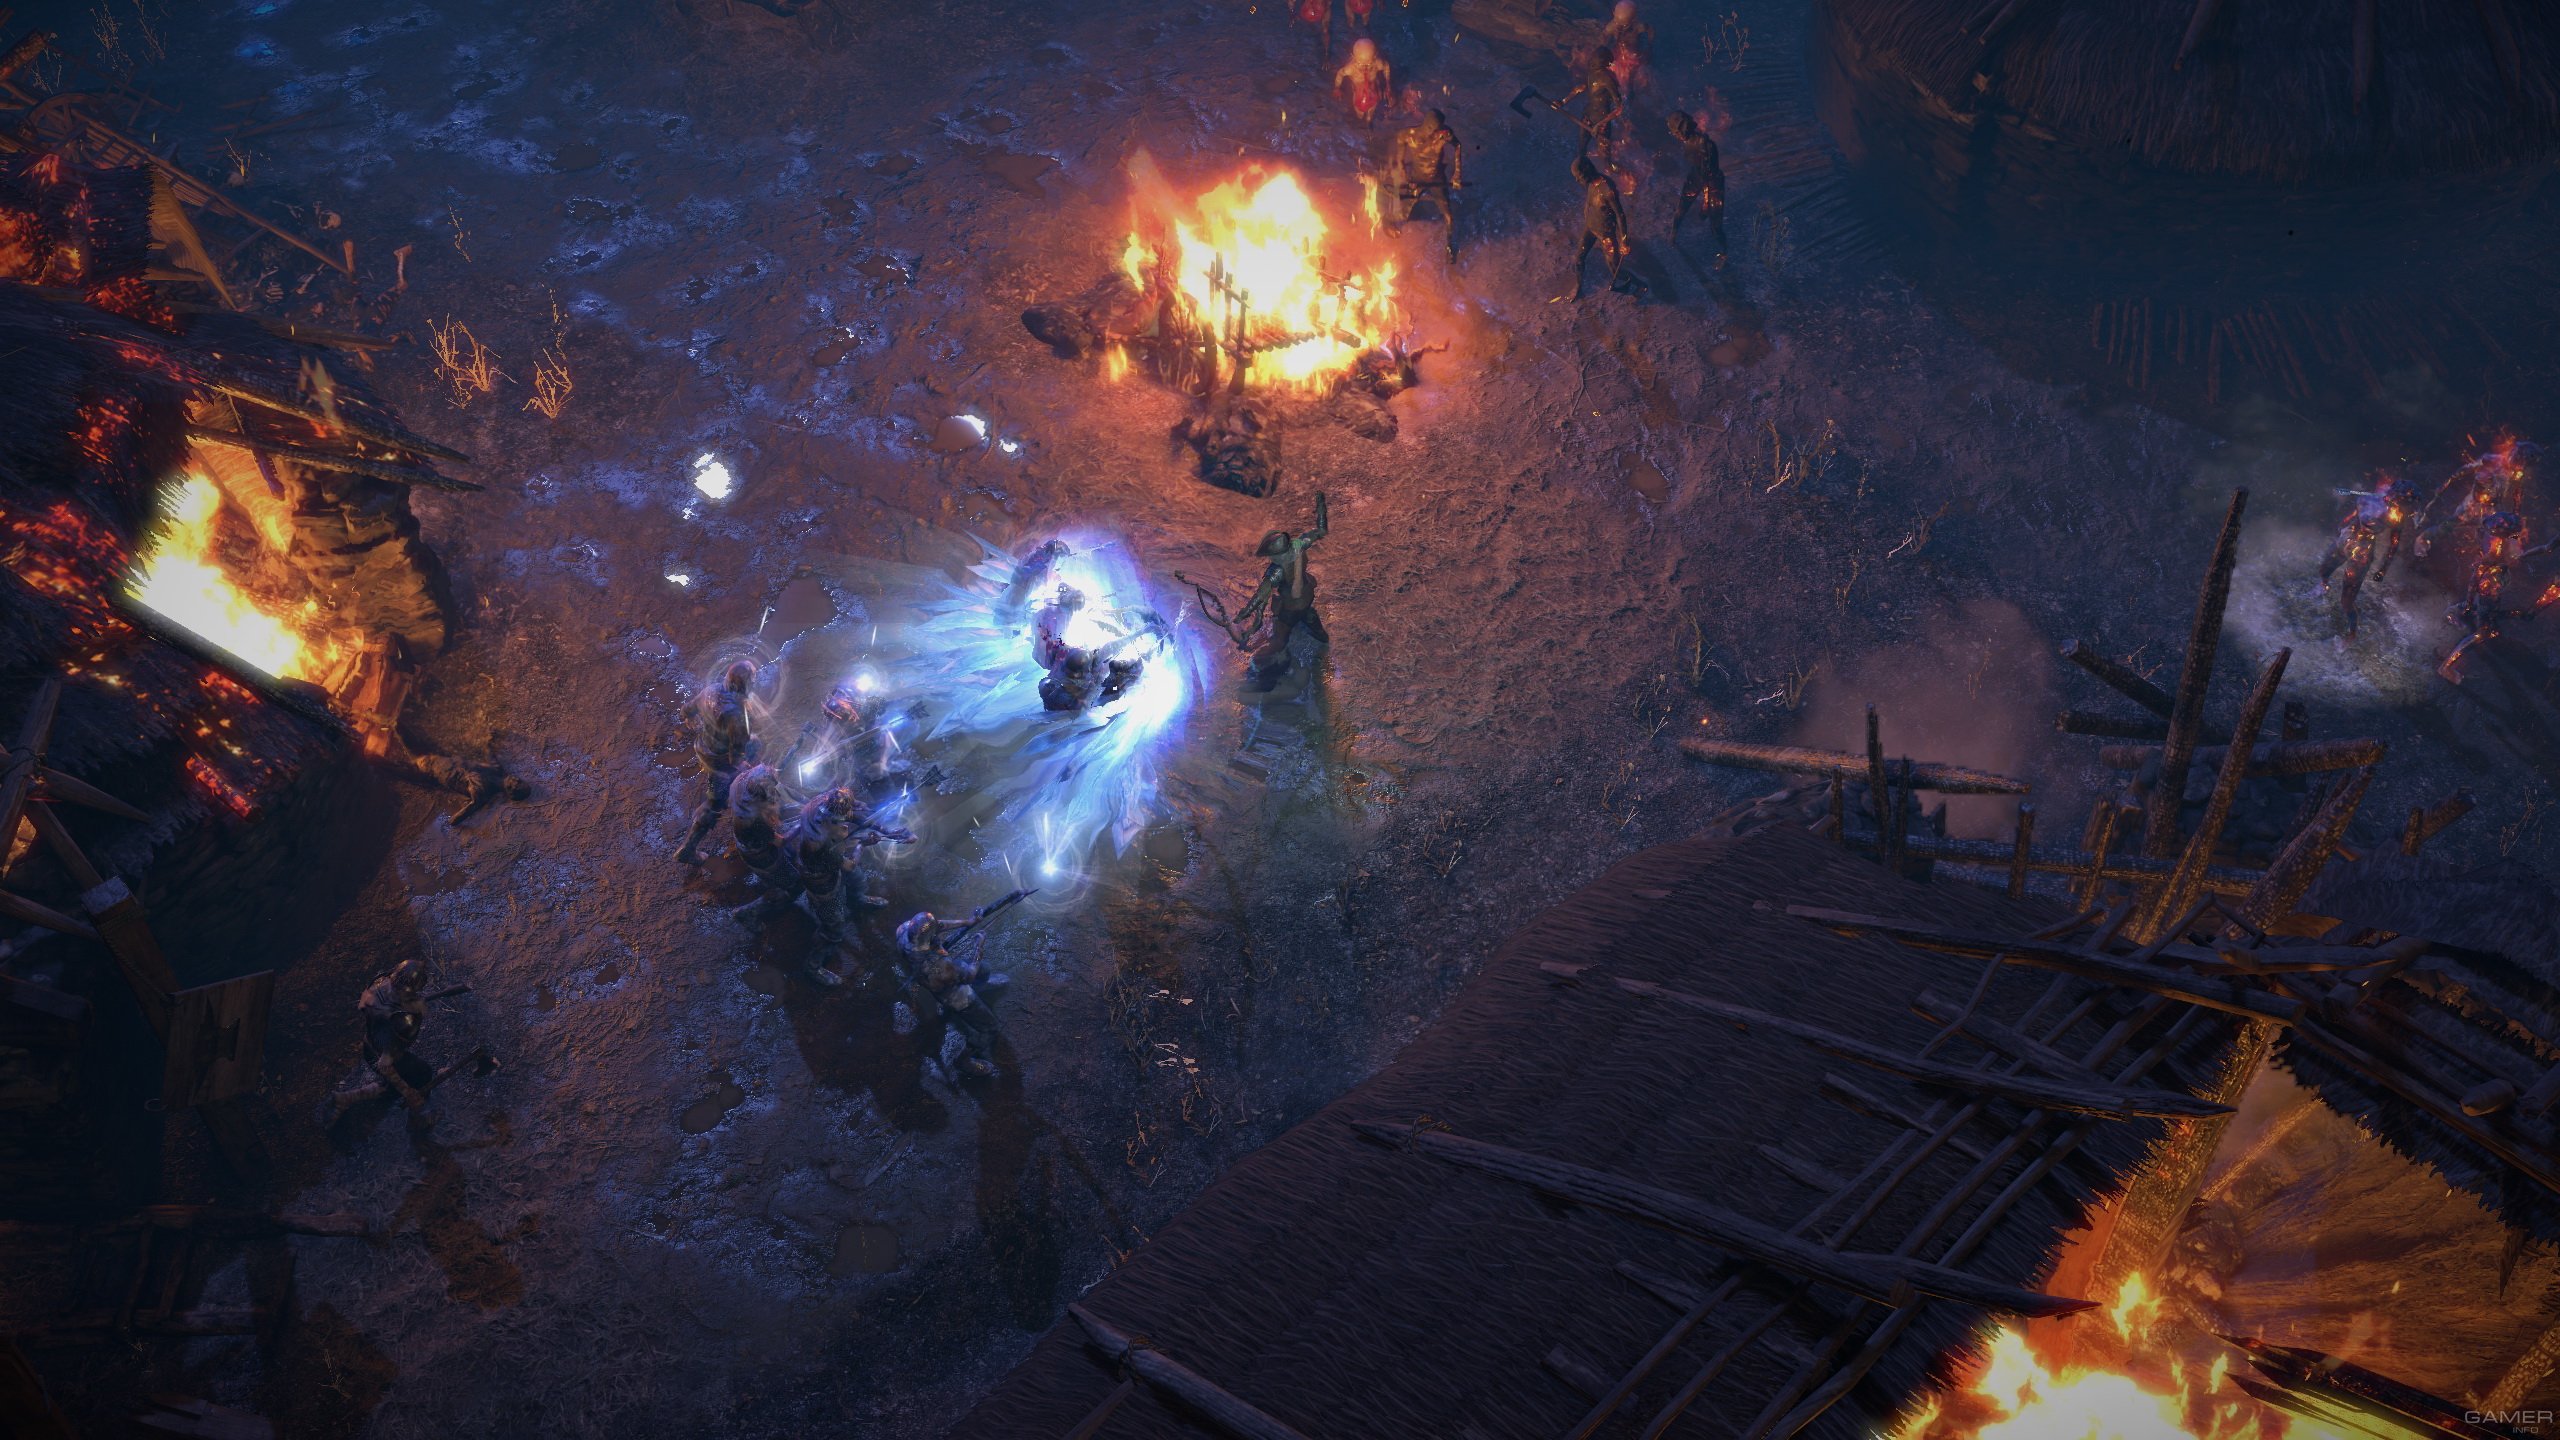 path of exile 2 ps5 release date